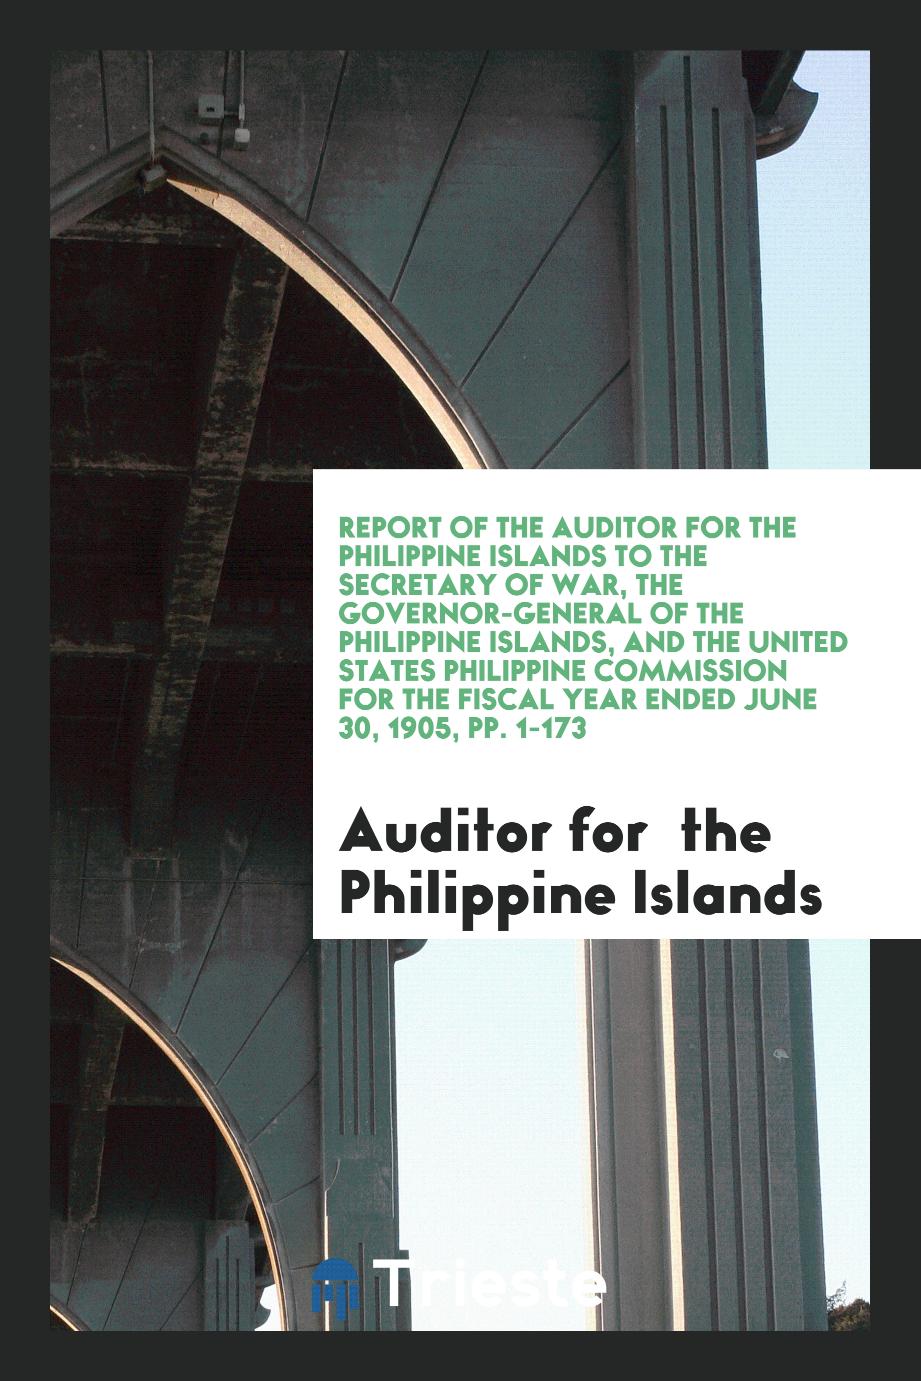 Report of the Auditor for the Philippine Islands to the Secretary of War, the Governor-General of the Philippine Islands, and the United States Philippine Commission for the Fiscal Year Ended June 30, 1905, pp. 1-173